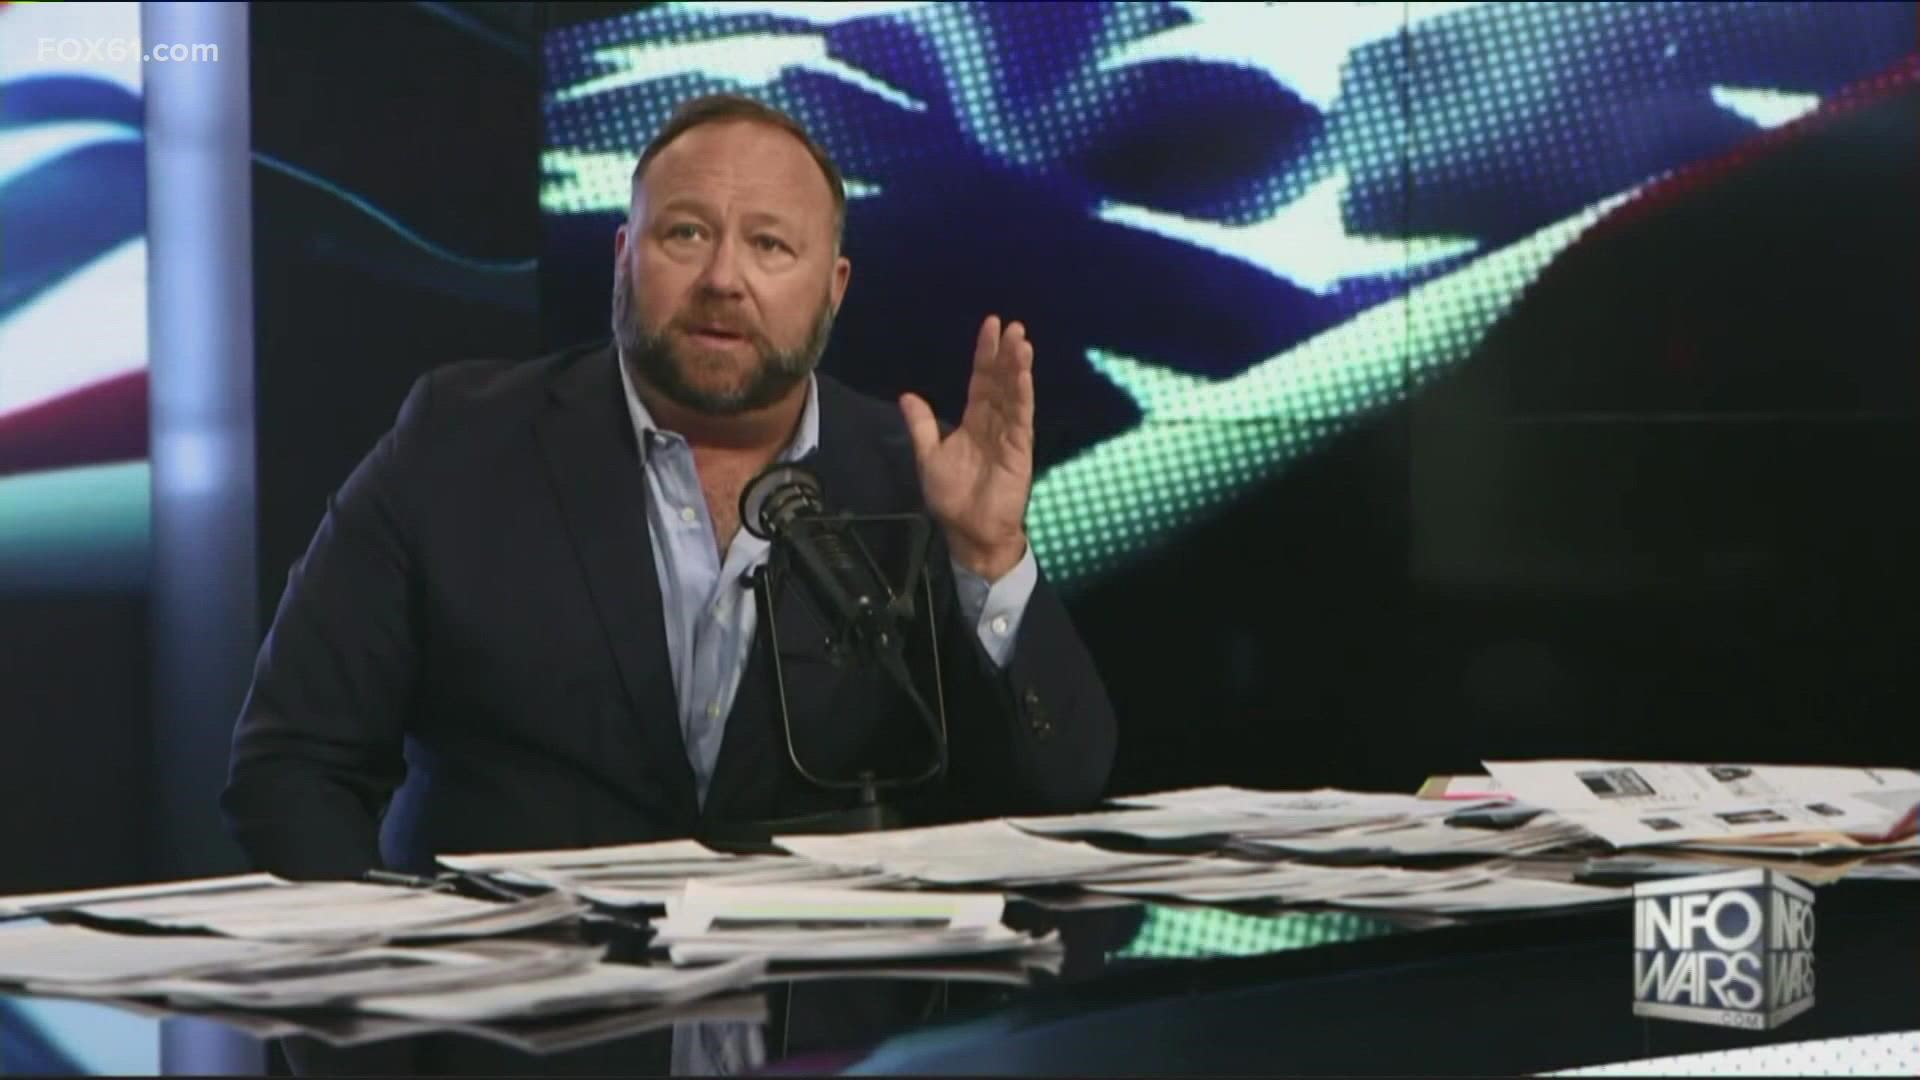 Alex Jones was ordered to pay $965 million to Sandy Hook families.